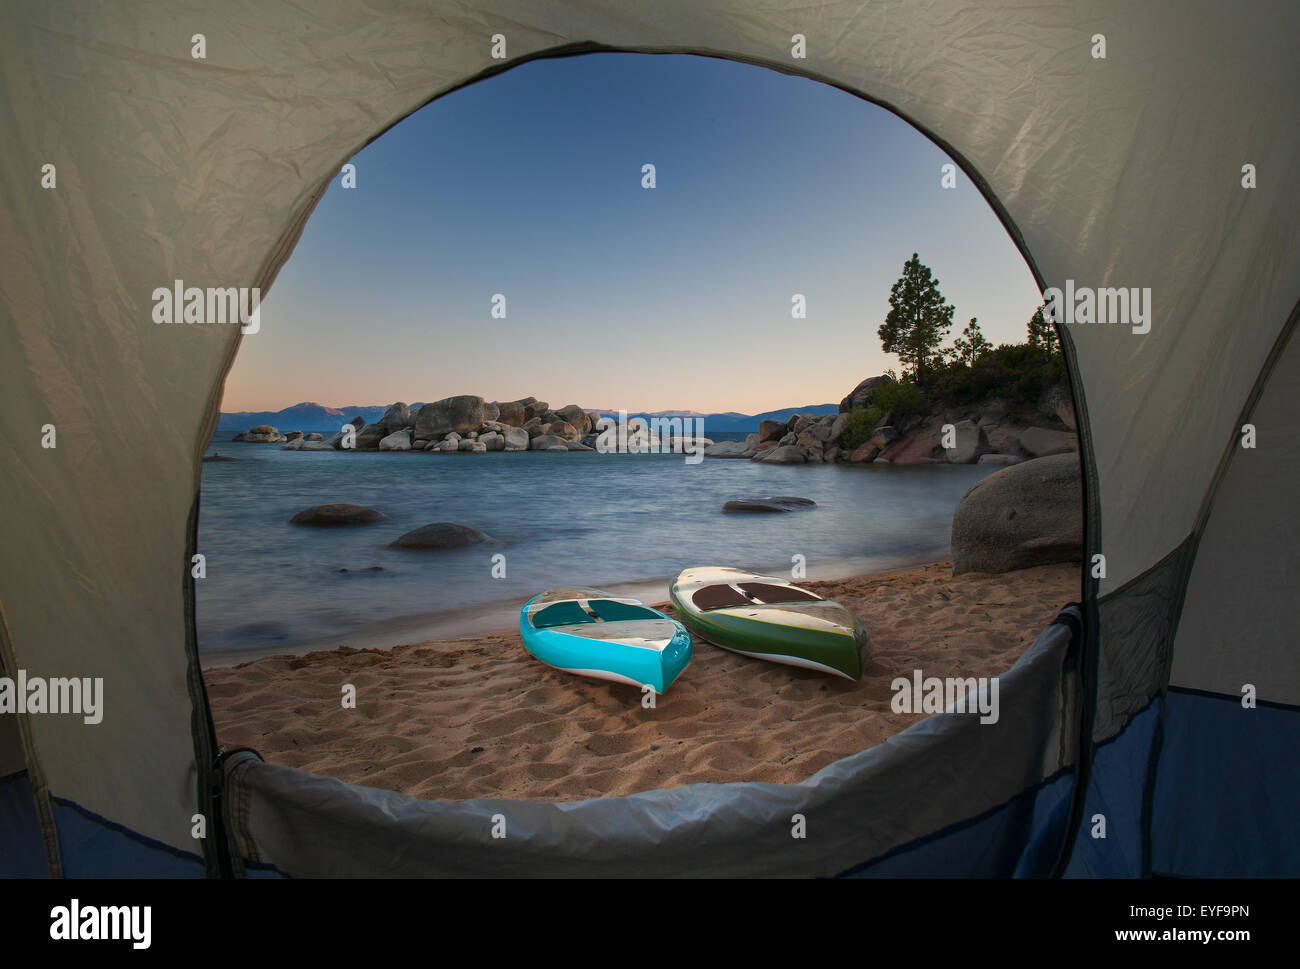 A view through a tent door of two paddle boards sitting on a beach of Lake Tahoe, California in the early evening. Stock Photo